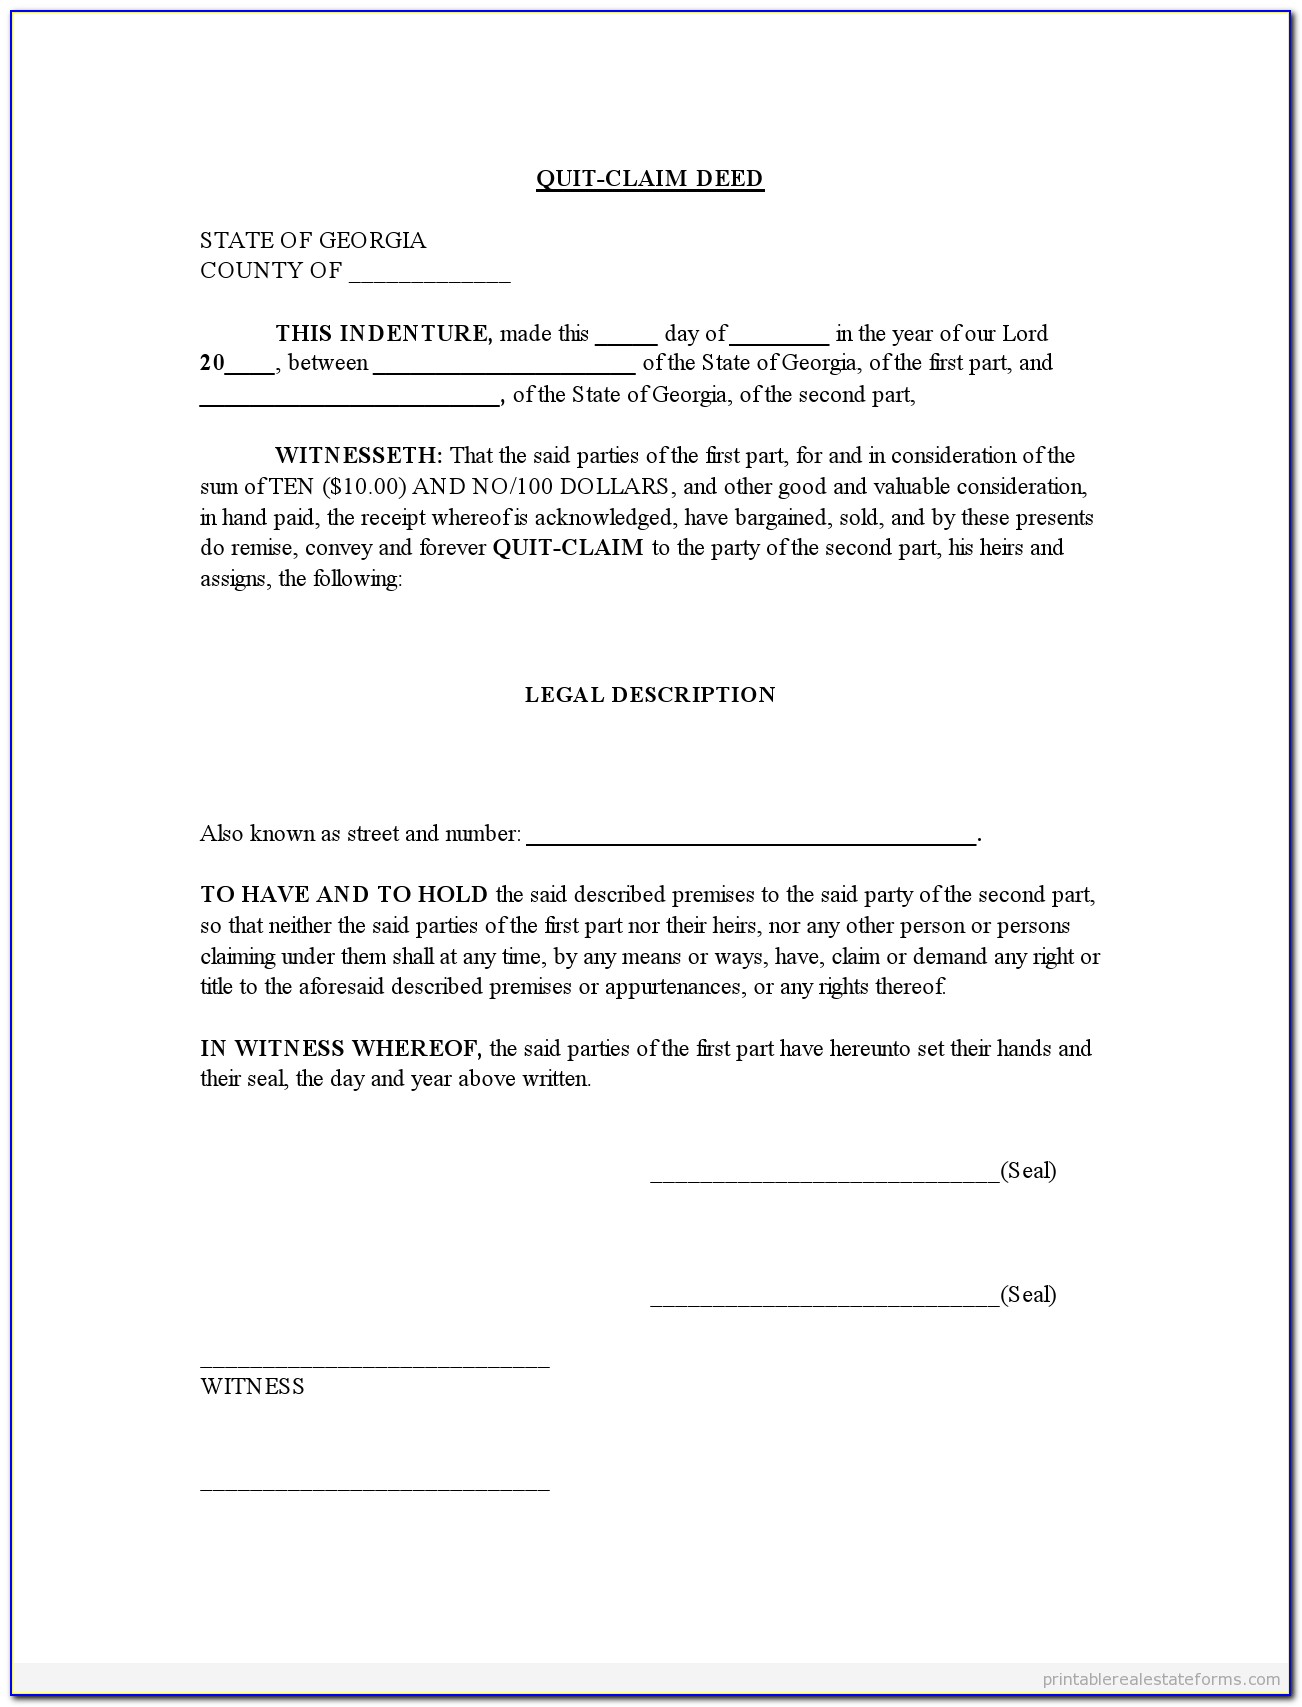 Wisconsin Quit Claim Deed Form 3 2003